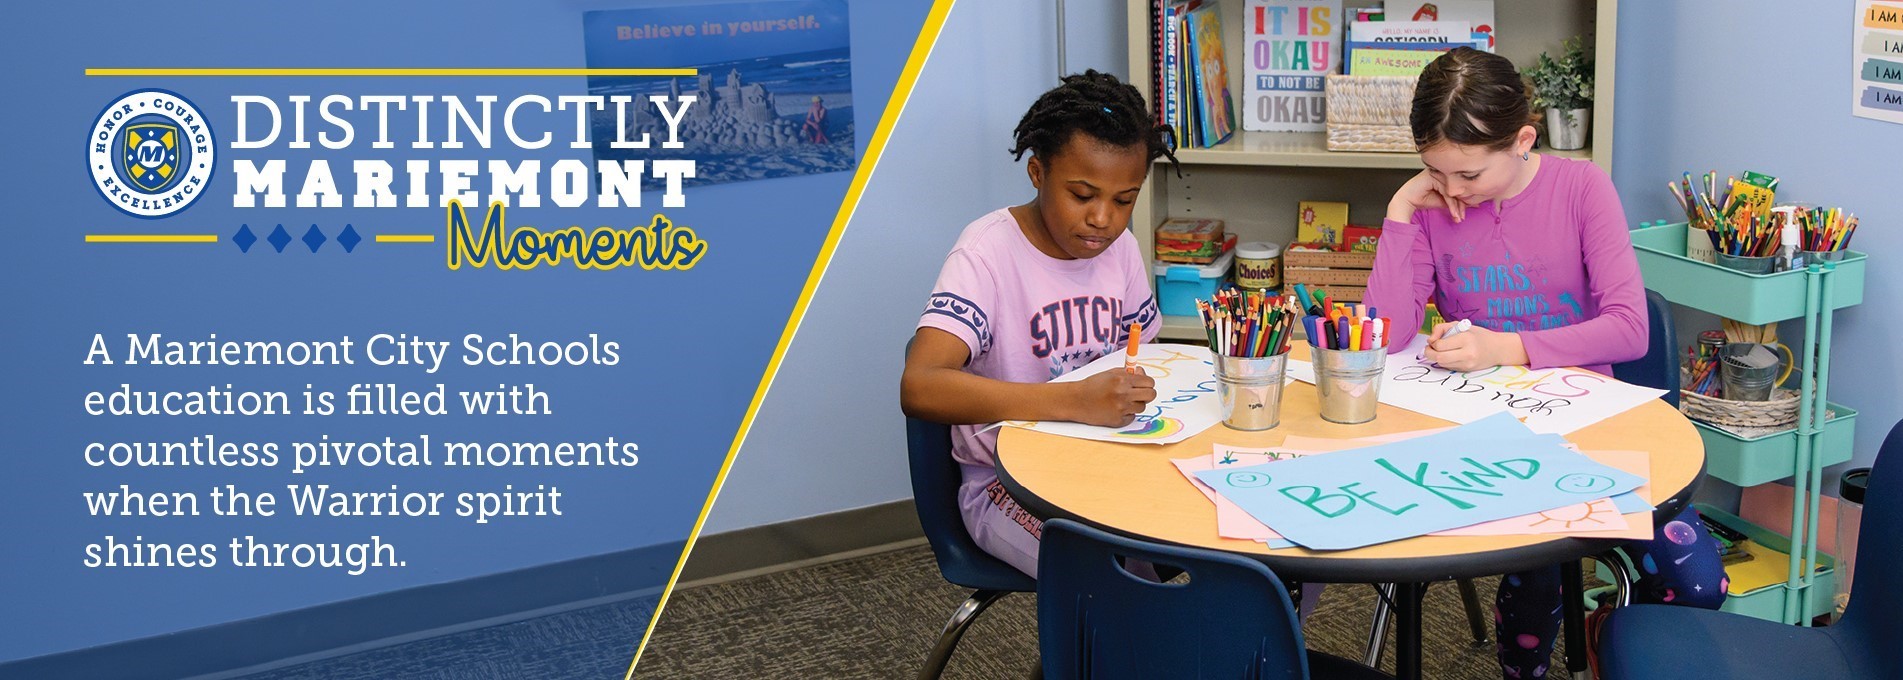 Distinctly Mariemont: Moments - A Mariemont City Schools education is filled with countless pivotal moments when the Warrior spirit shines through - students coloring Be Kind posters